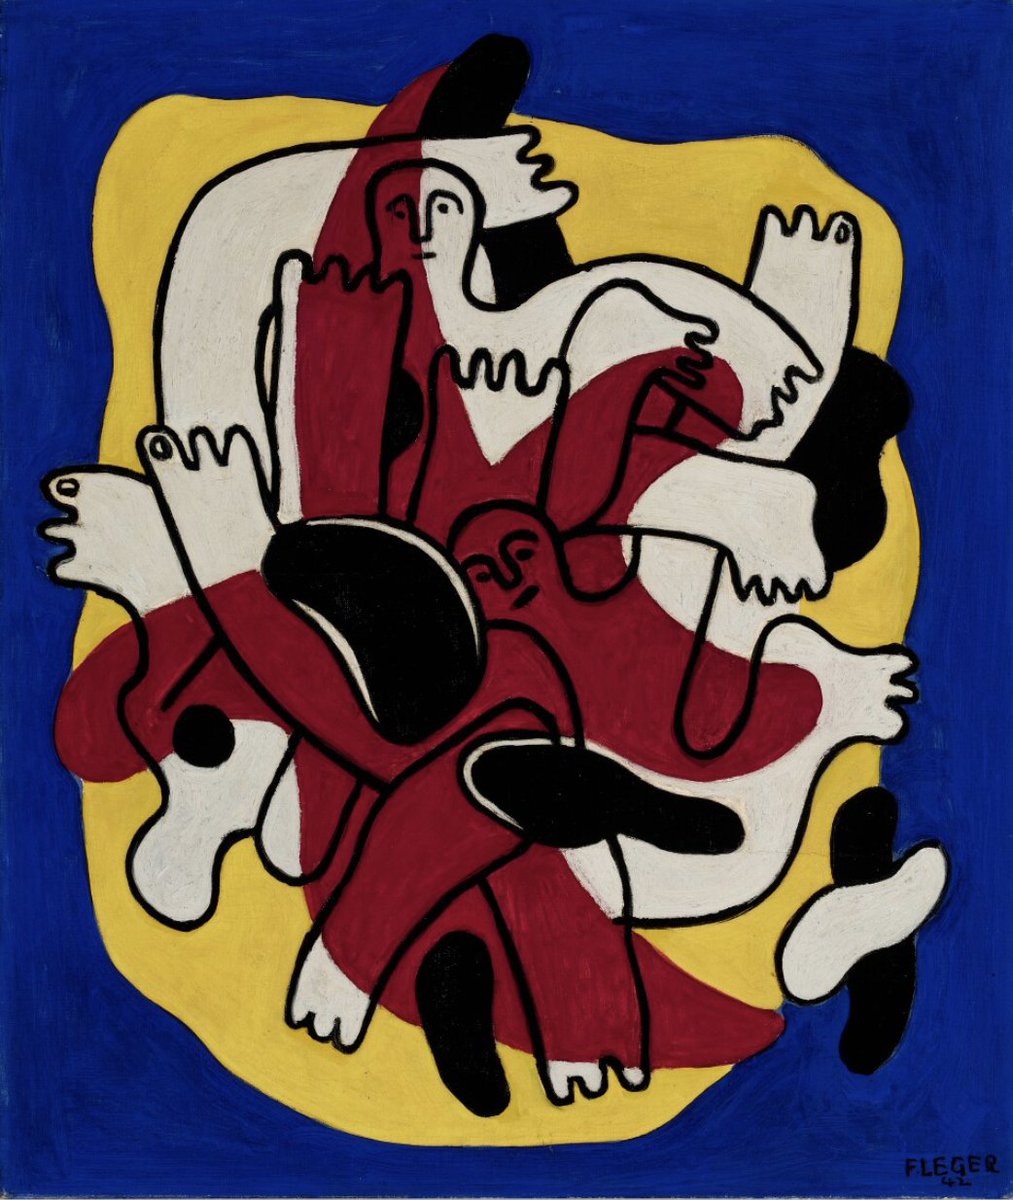 #AuctionUpdate: One of the very few oil paintings from the artist’s seminal Les Plongeurs series remaining in private hands, 'L’Étoile rouge (Les Plongeurs)' by Fernand Léger has sold for $1.2m #TheFisherLandauLegacy